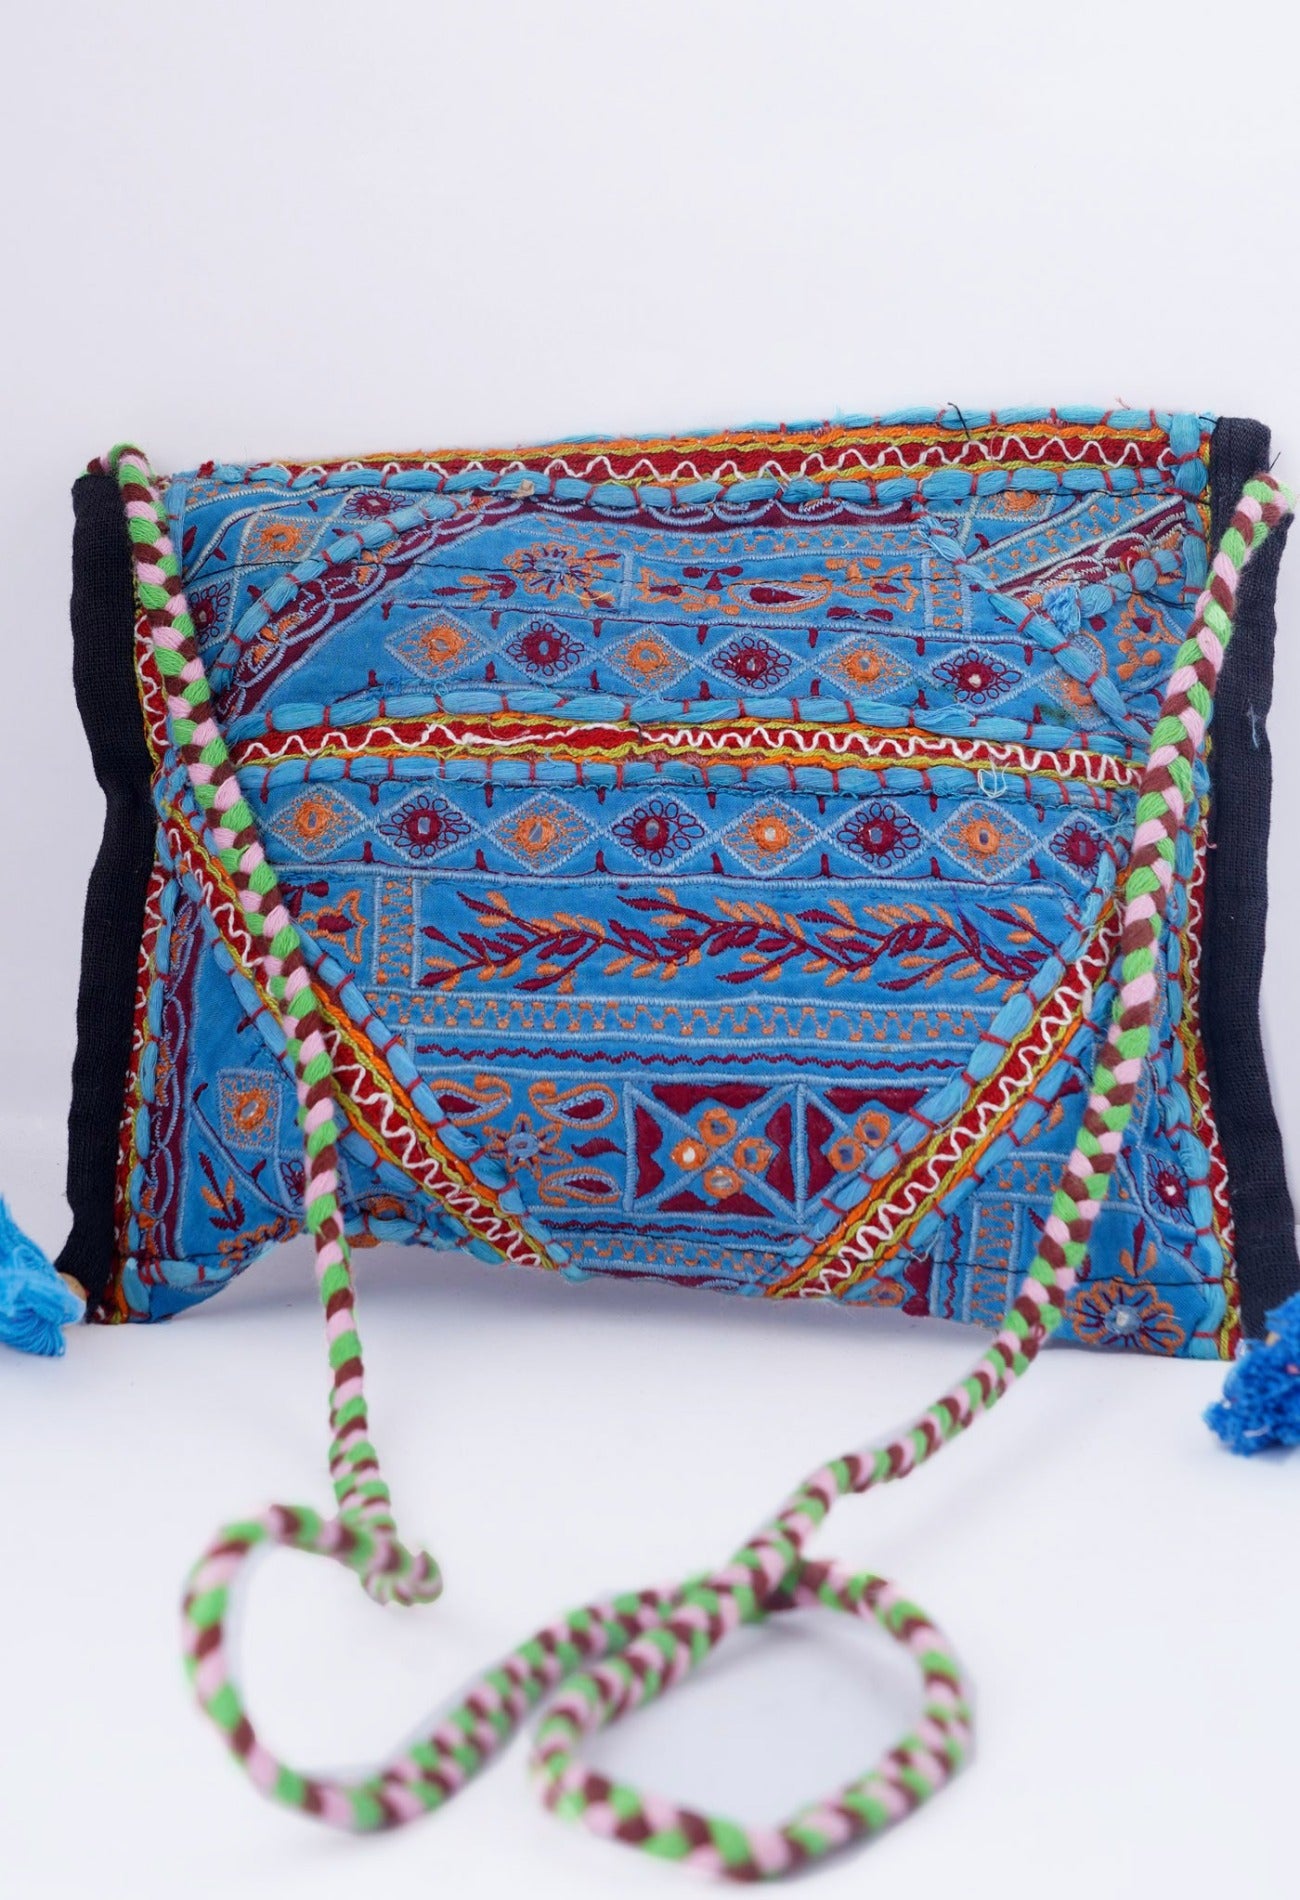 Online Shopping for Blue Indian Handicraft Embroidered Hand Bag with Weaving from Rajasthan at Unnatisilks.com India_x000D_
Online Shopping for Blue Indian Handicraft Embroidered Hand Bag with Weaving from Rajasthan at Unnatisilks.com India_x000D_
